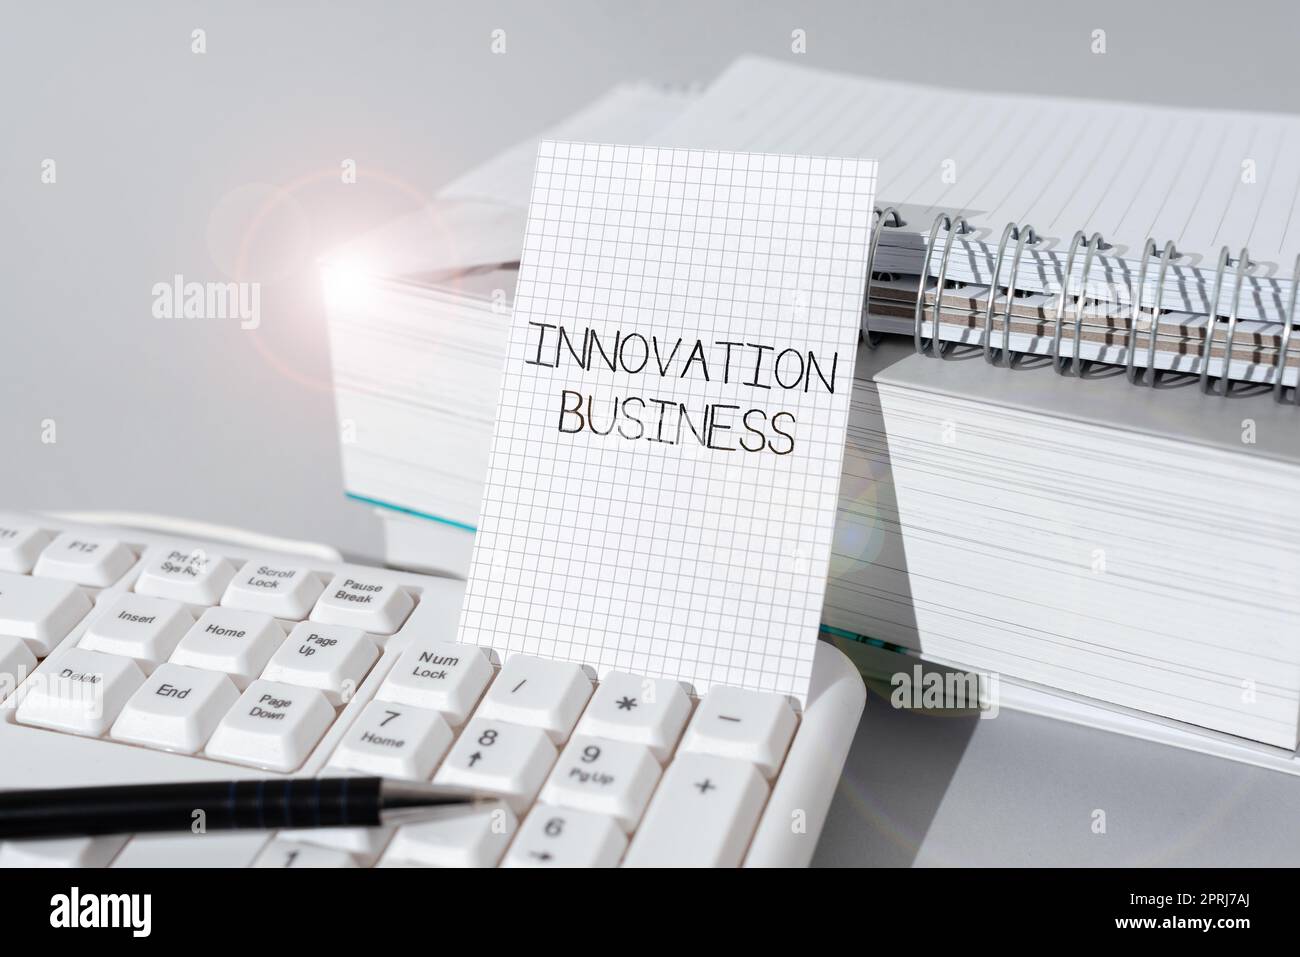 Writing displaying text Innovation Business. Business idea Introduce New Ideas Workflows Methodology Services Stock Photo